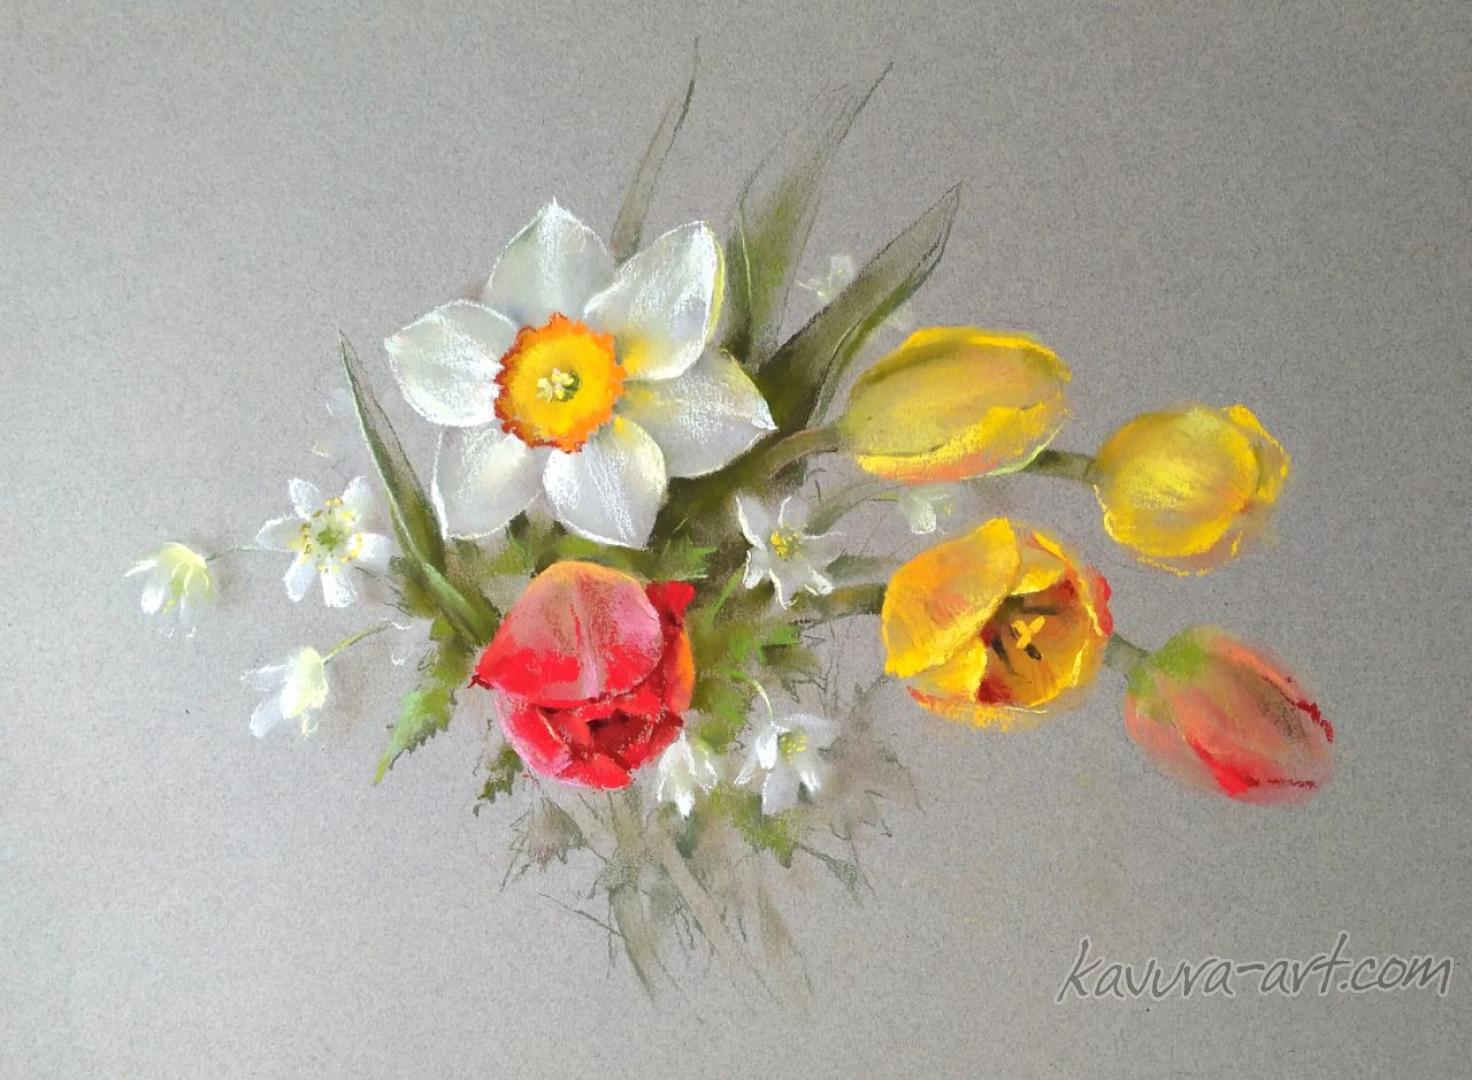 "Spring flowers" Pastel on paper.